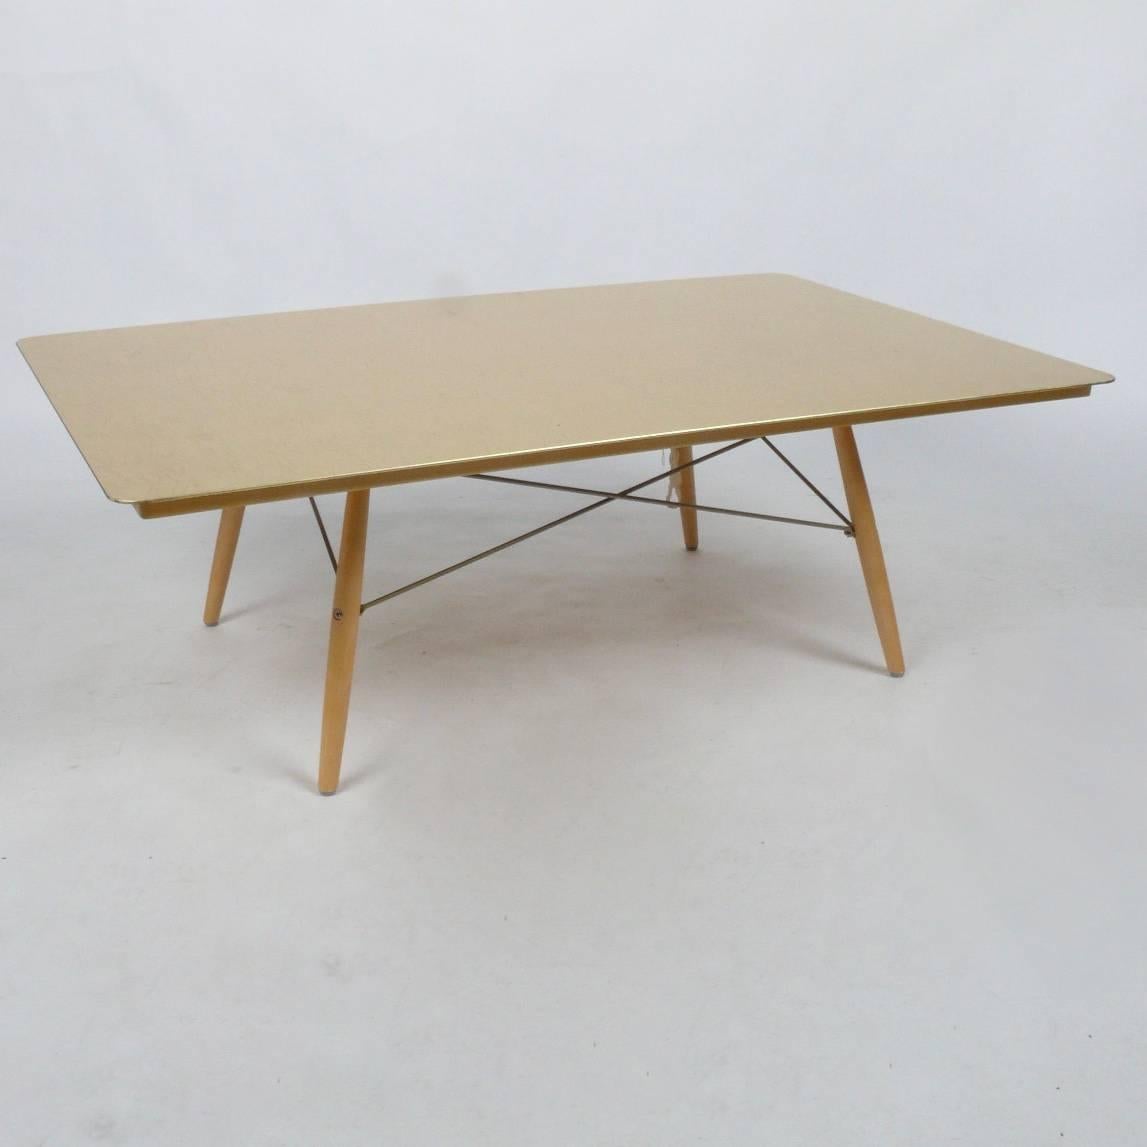 American Eames House 50th Anniversary Coffee Table